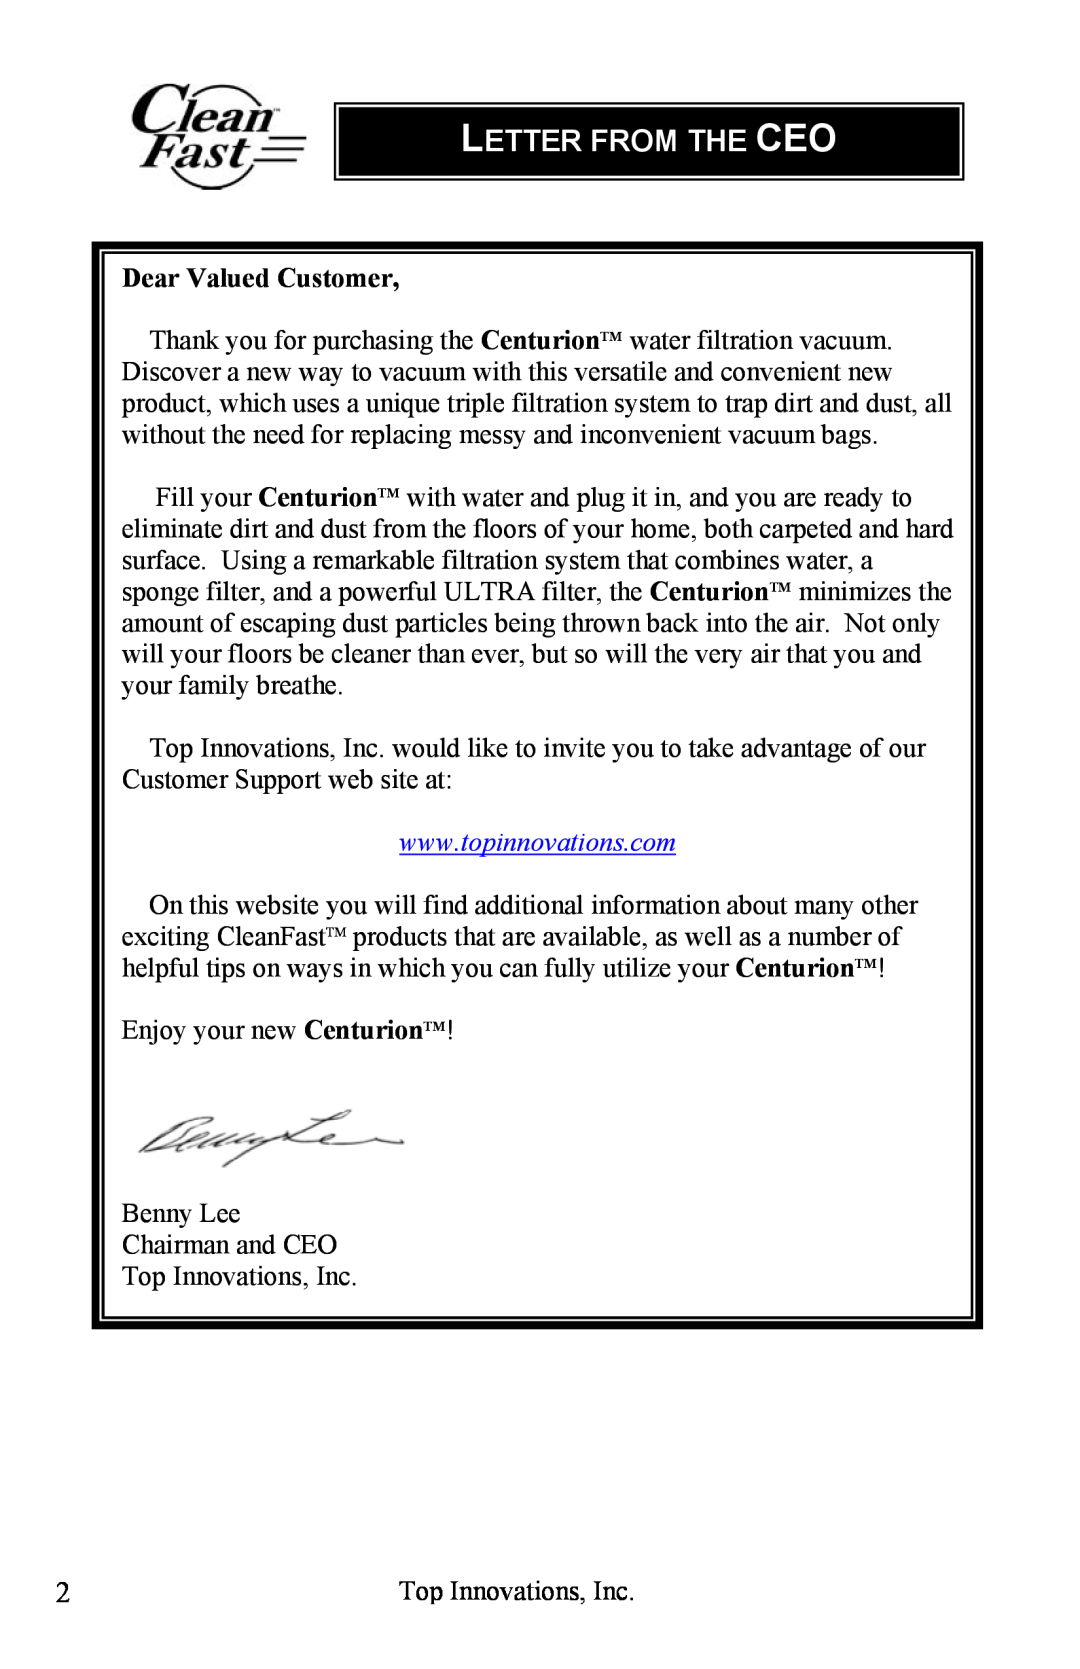 Top Innovations CF-980 warranty Letter From The Ceo, Dear Valued Customer 